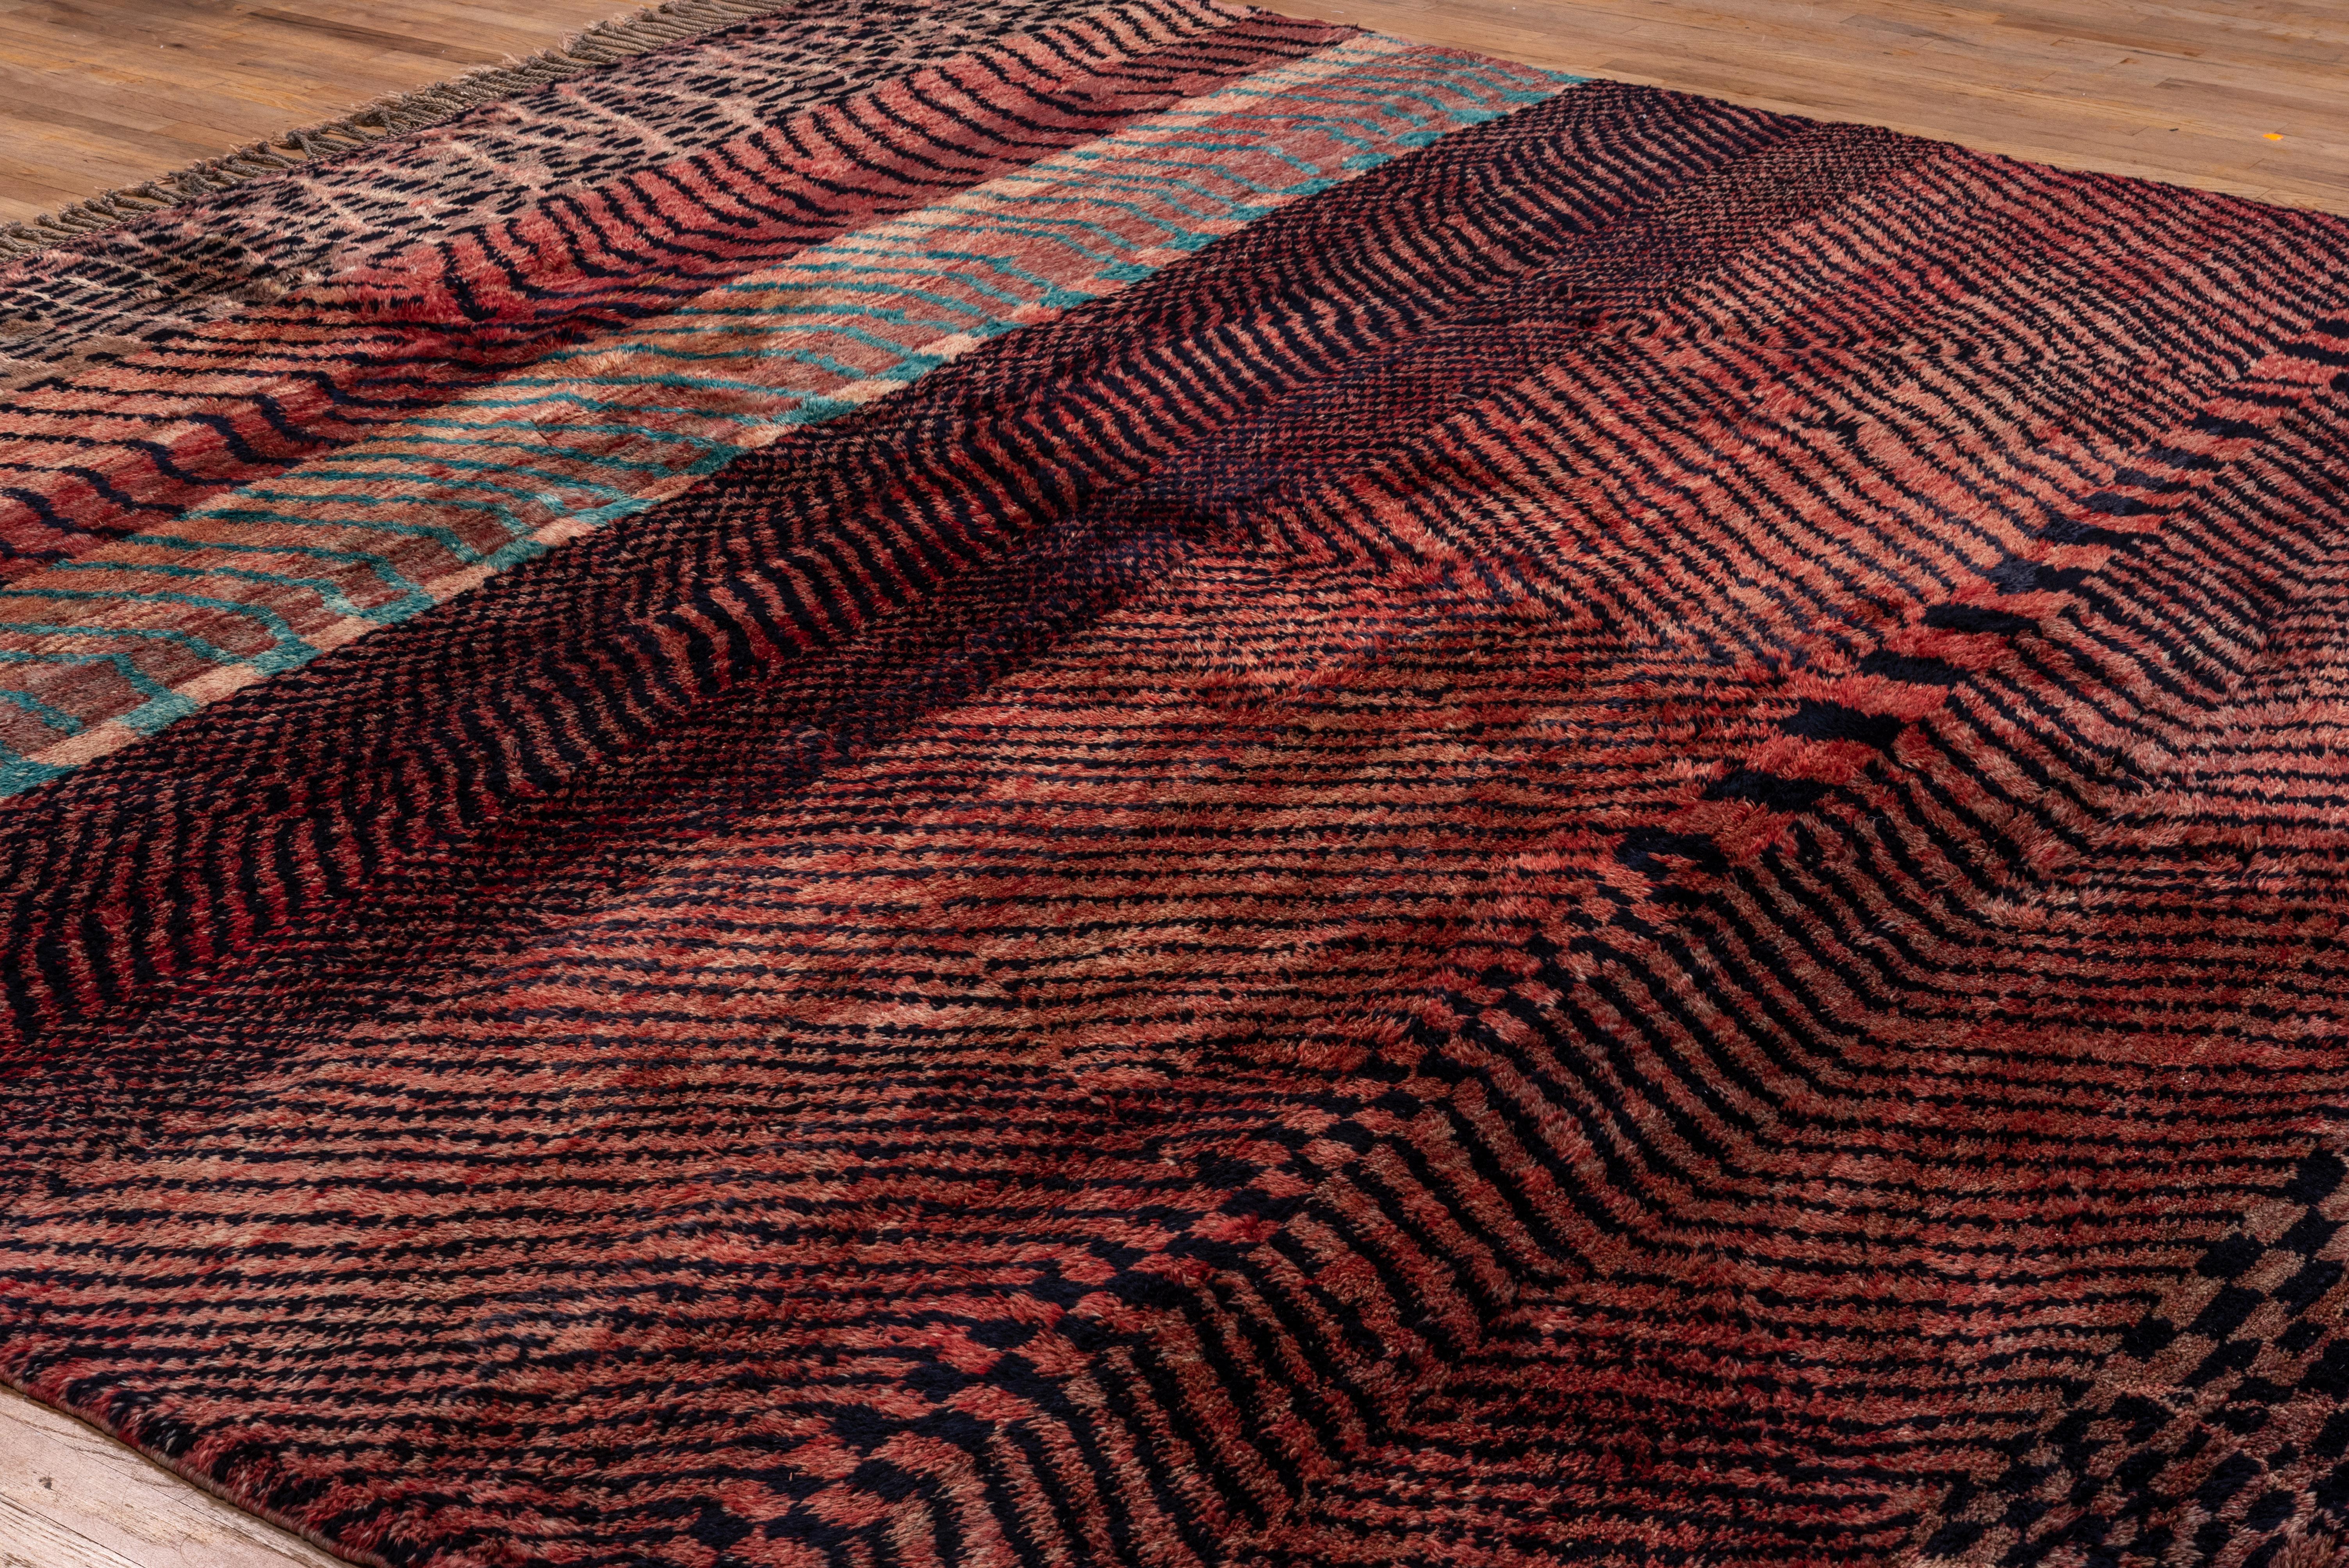 New production and high quality rug woven in Morocco with tones of gray, b lack, and variations of corals reds and pink. Excellent brand new condition.